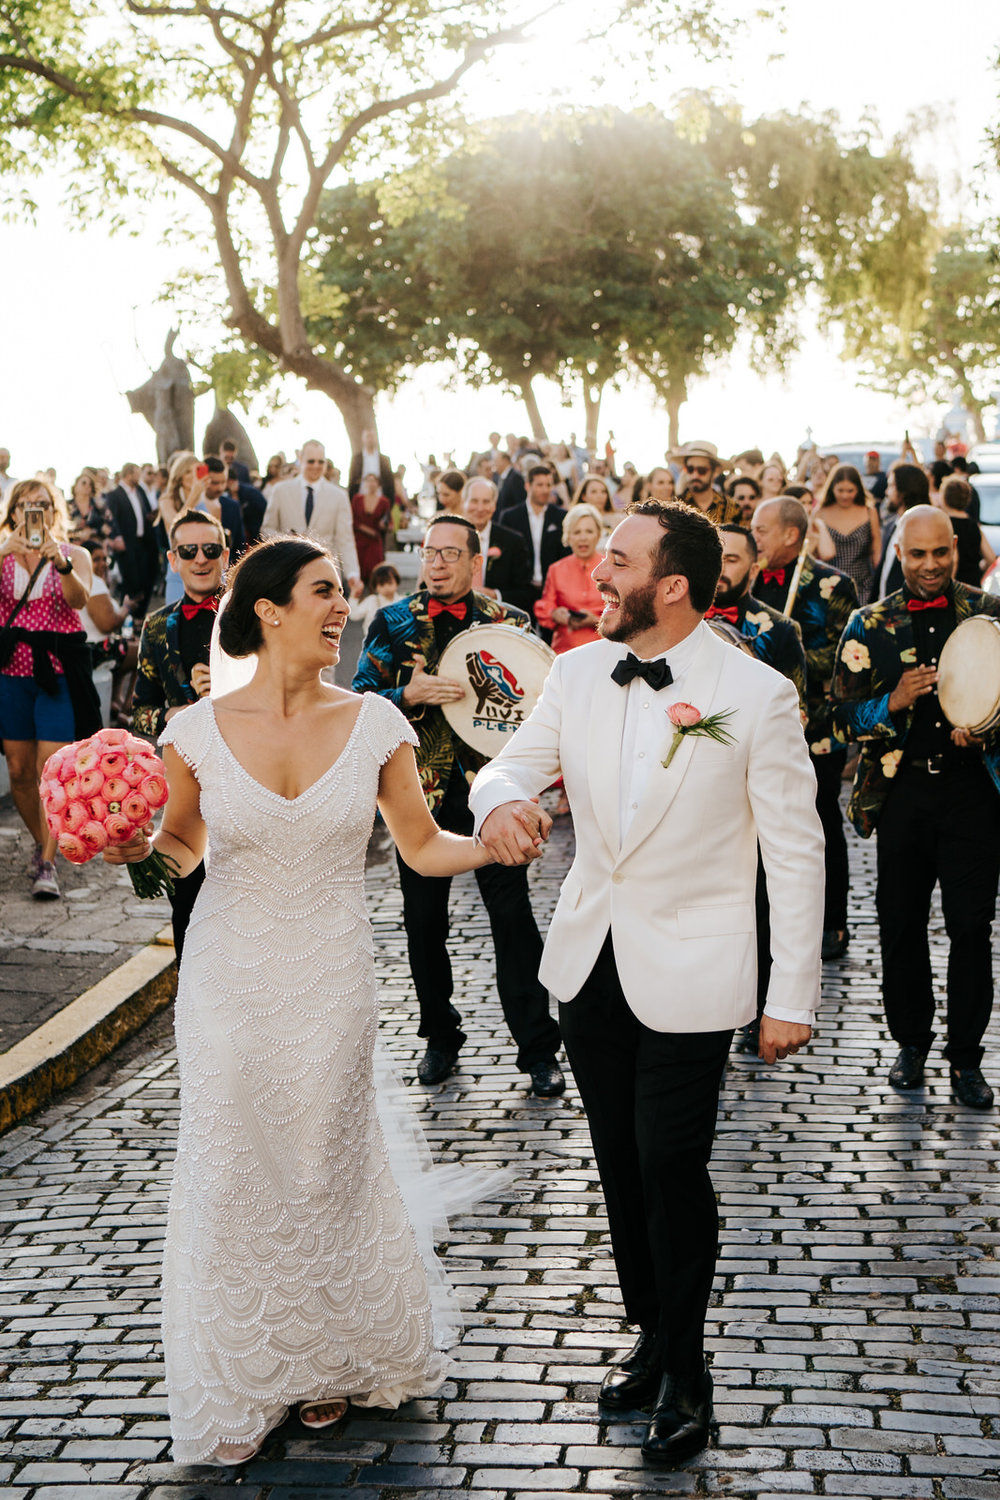  Bride and groom hold hands and smile at each other while the sun shines and musicians and guests follow behind them 